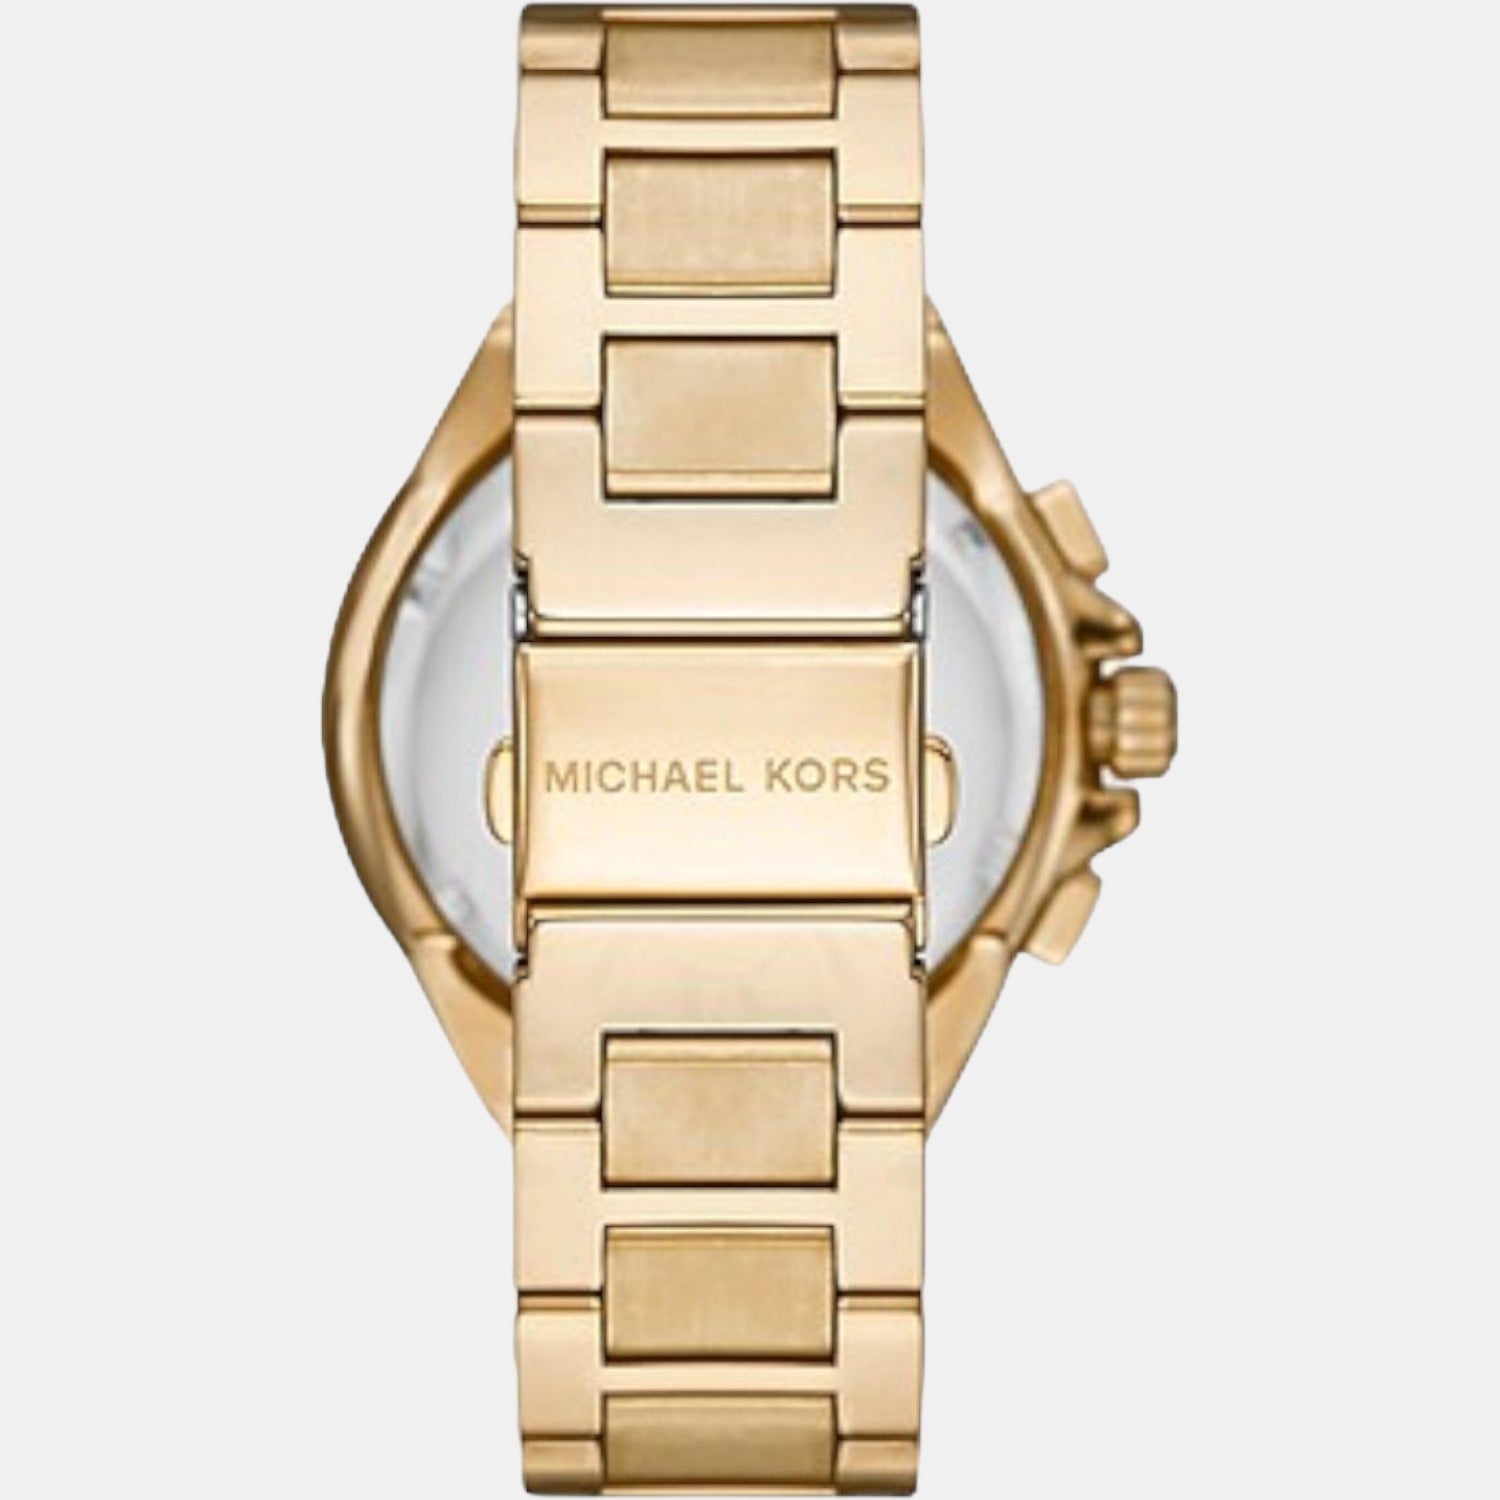 Round Michael Kors Women Watch, For Daily, Model Name/Number: Mk